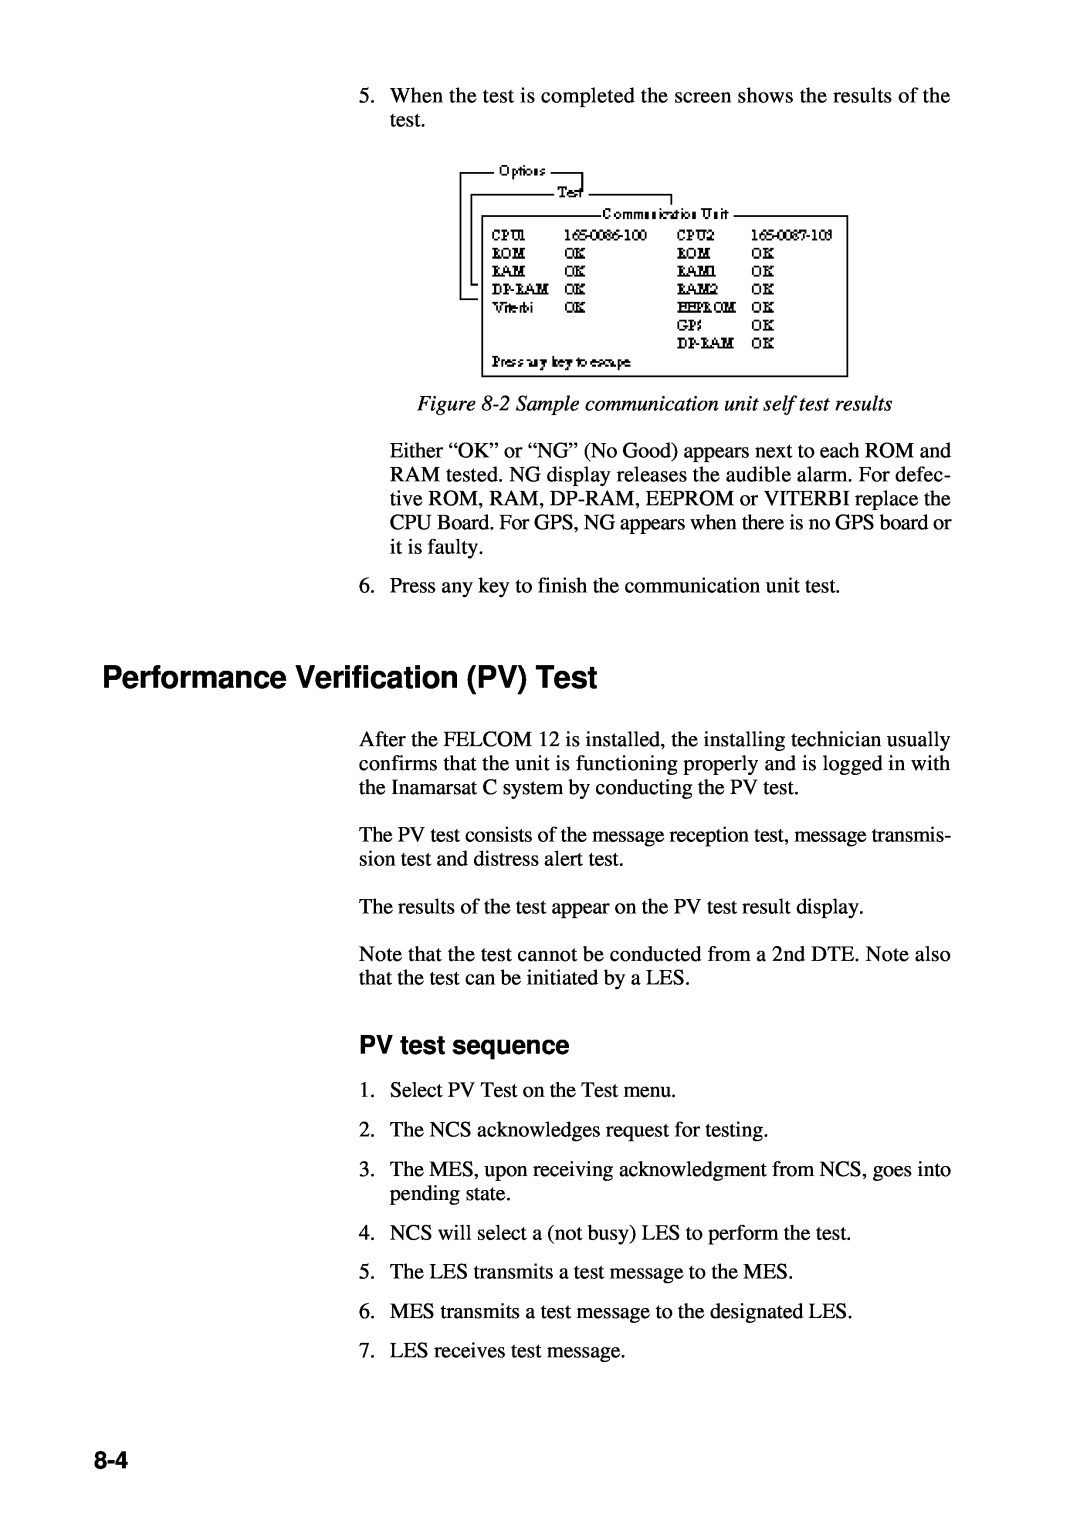 Furuno RC-1500-1T manual Performance Verification PV Test, PV test sequence, 2 Sample communication unit self test results 